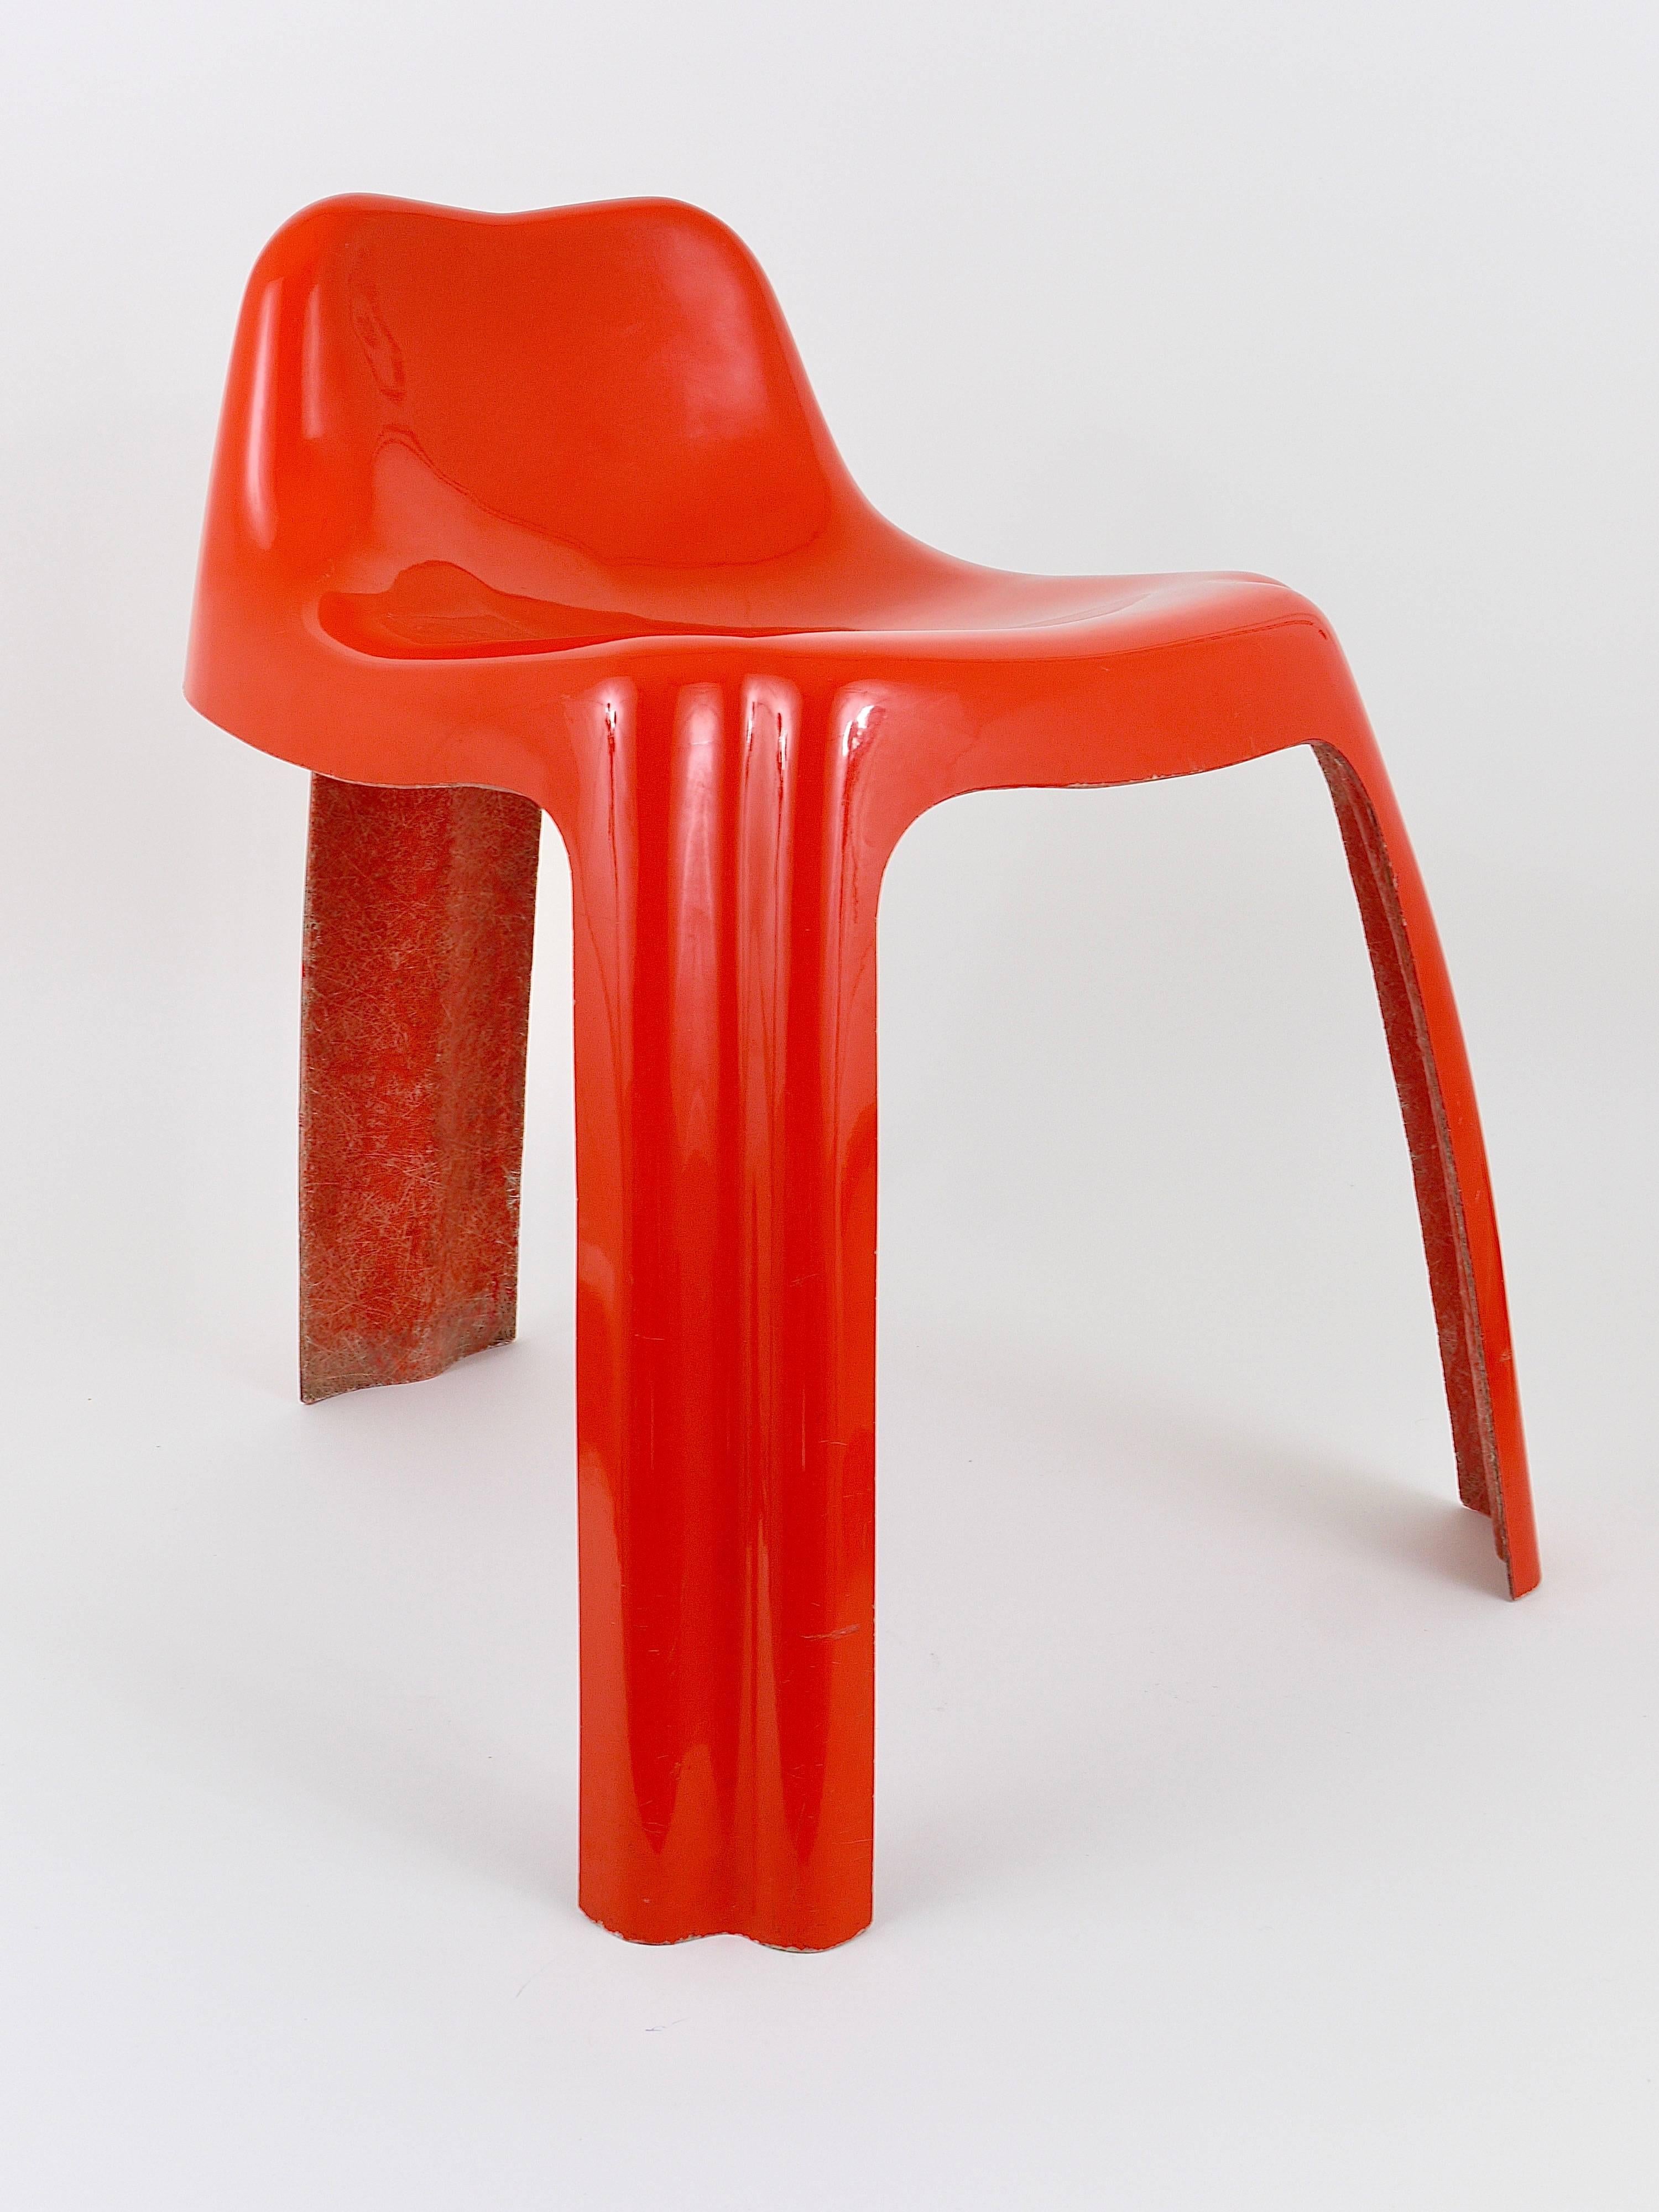 20th Century Orange Fiberglass Chair Ginger by Patrick Gingembre, Paulus, France, 1970s For Sale